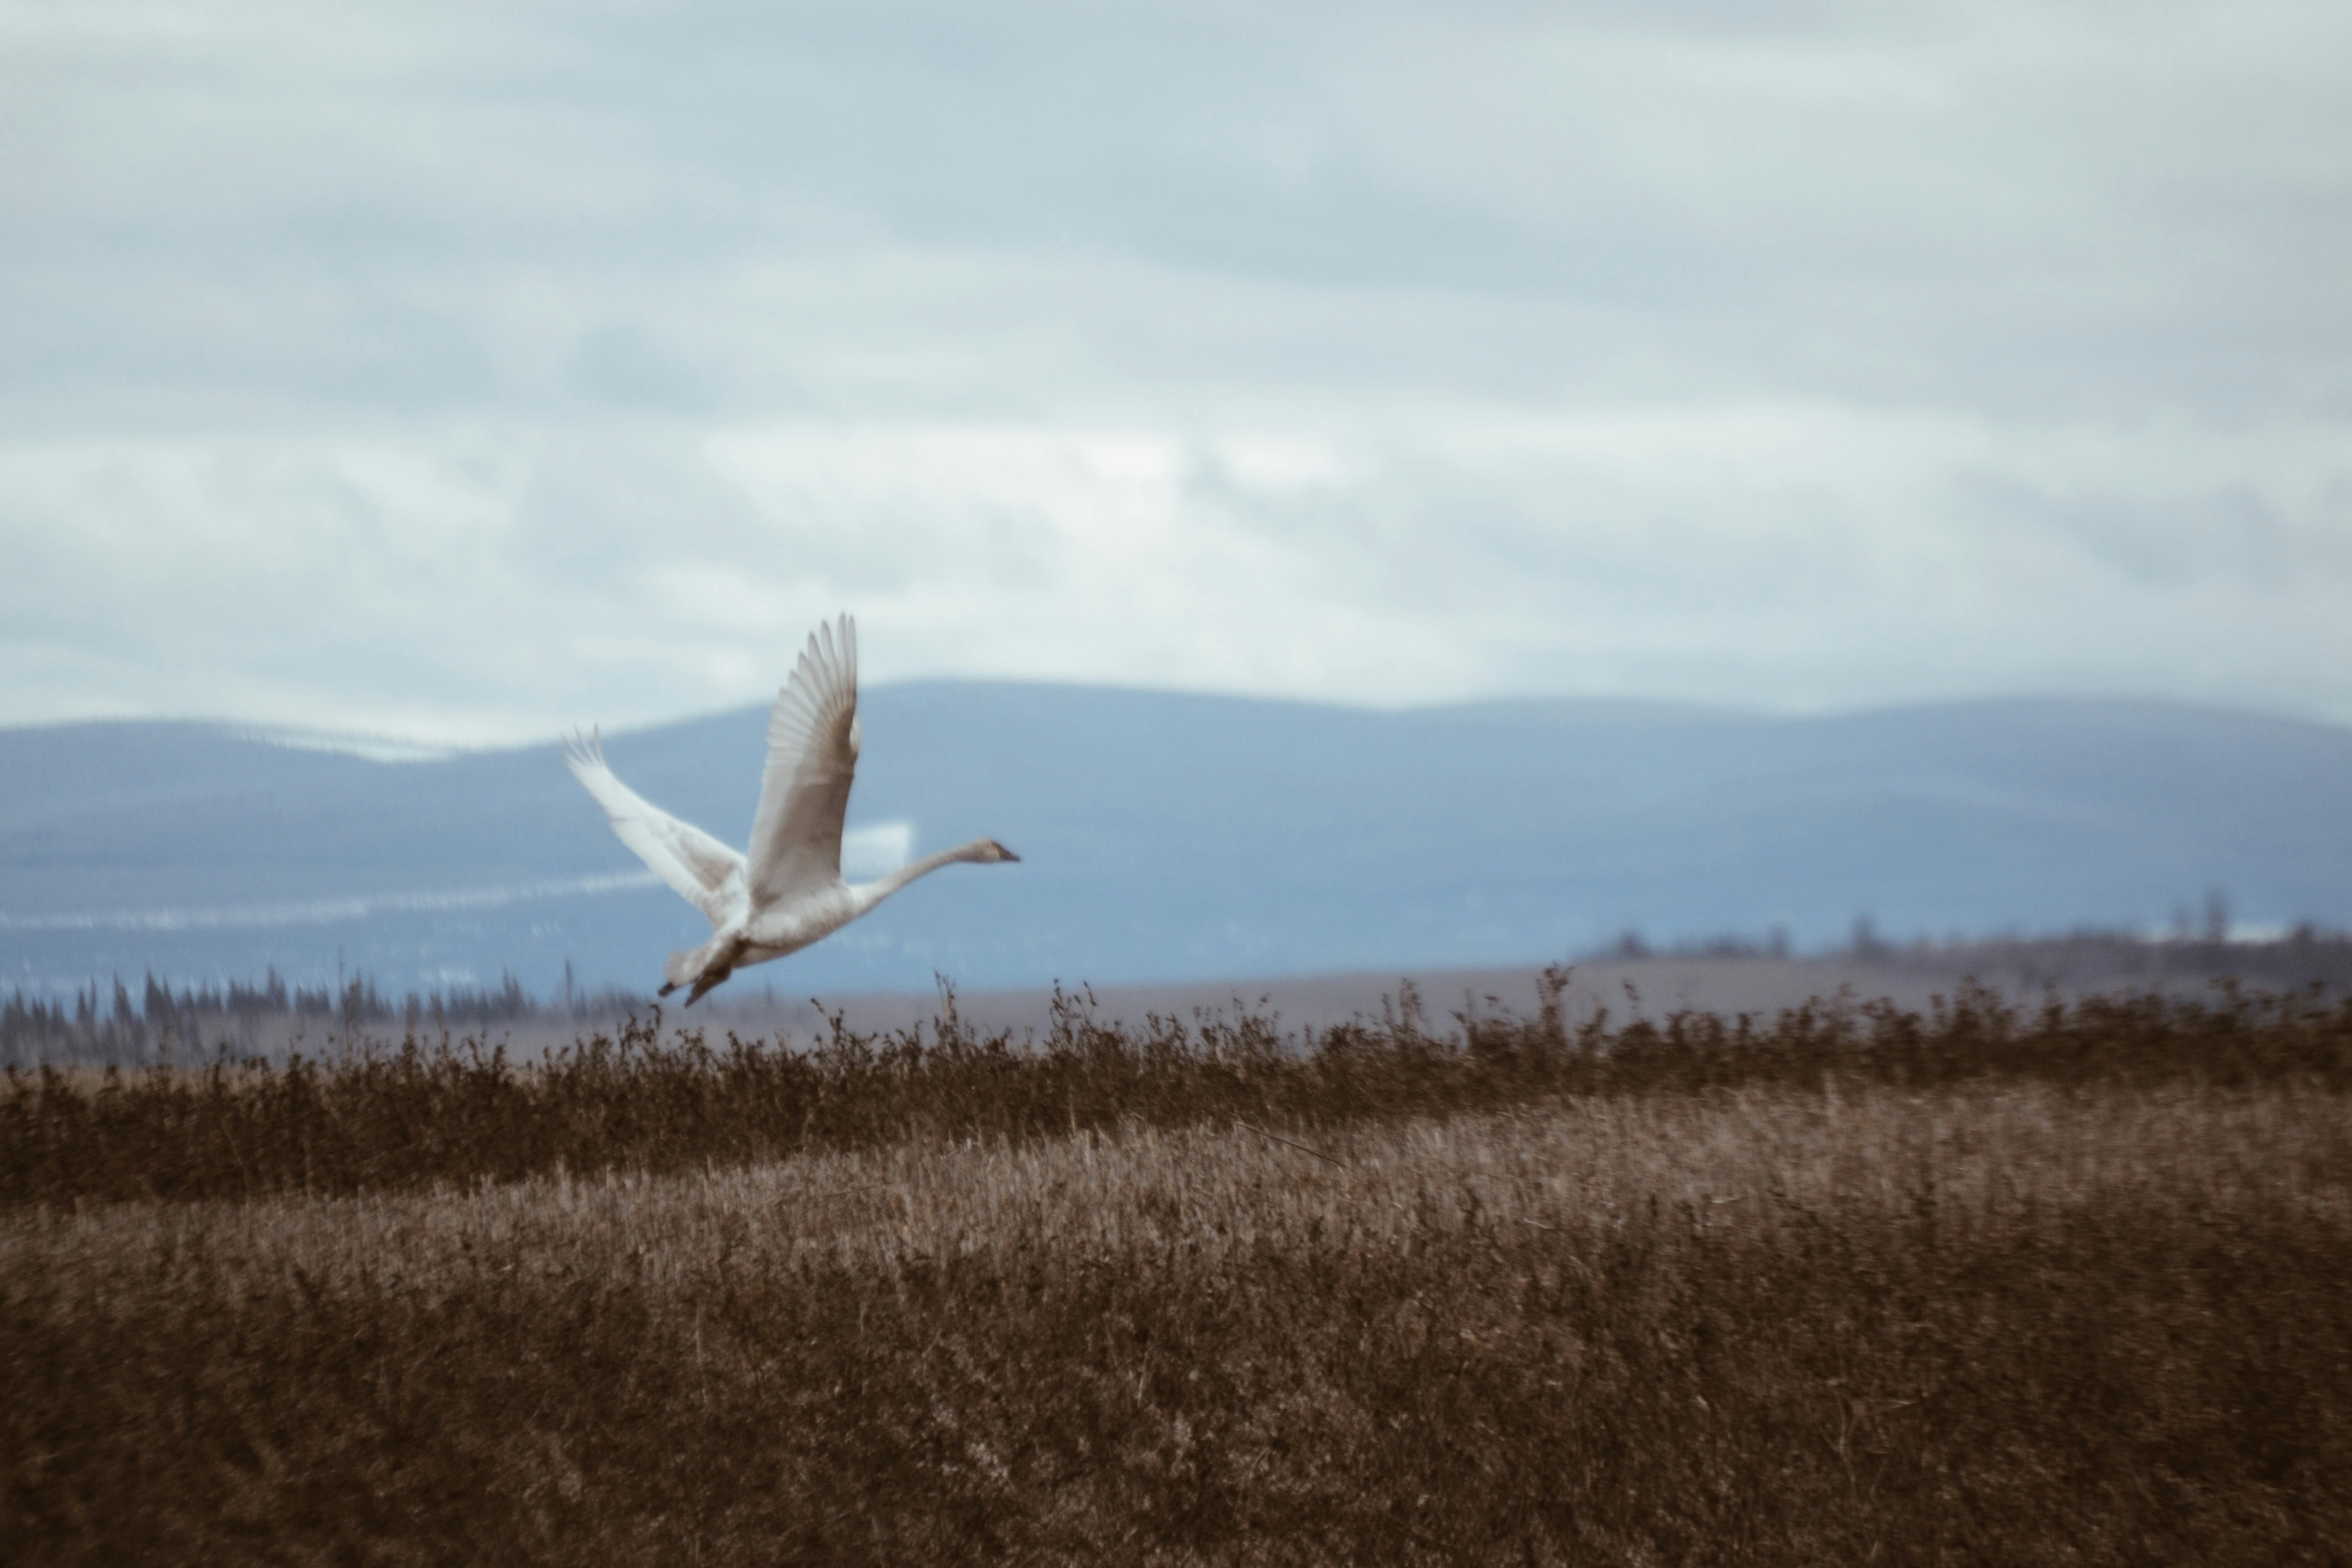 white bird flying over brown grass field during daytime